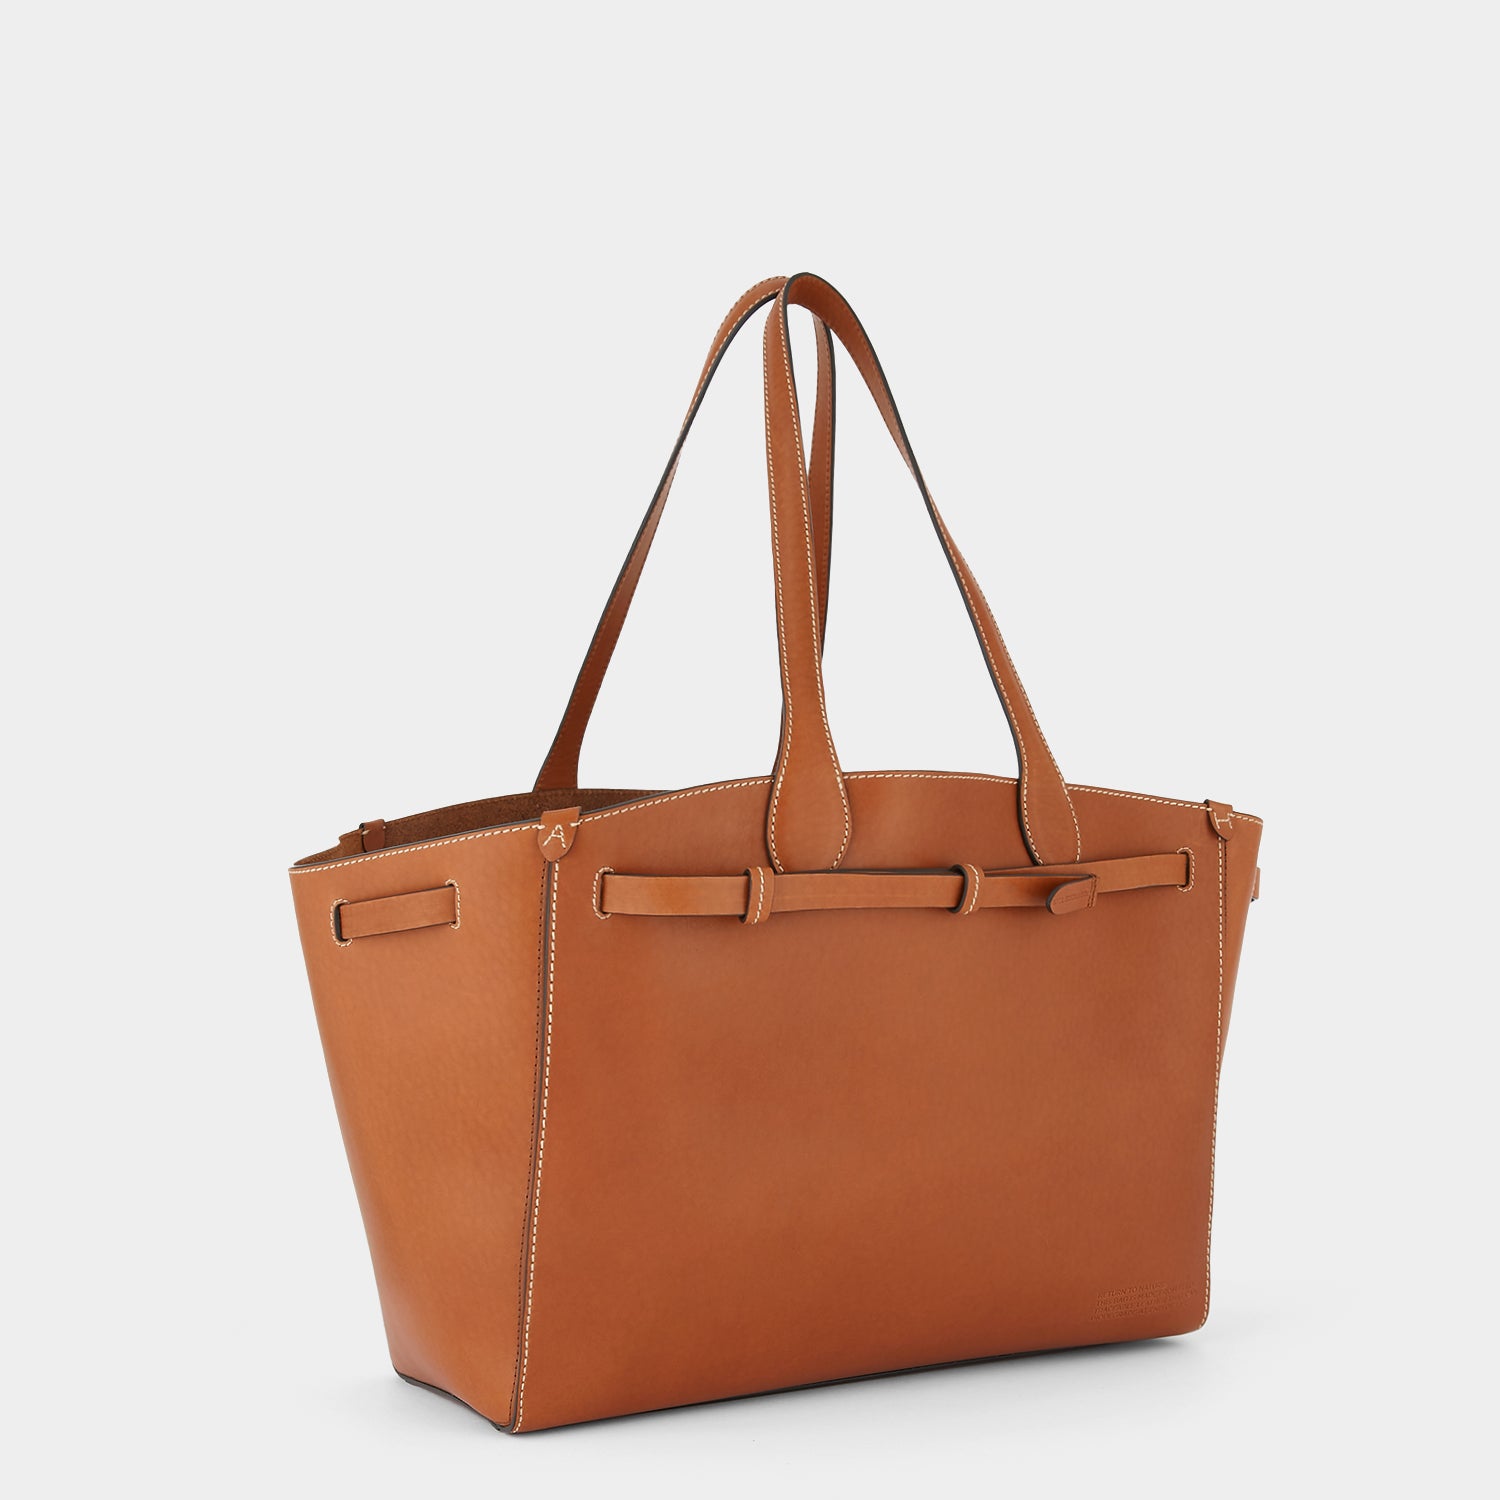 Return to Nature Tote -

                  
                    Compostable Leather in Tan -
                  

                  Anya Hindmarch UK
